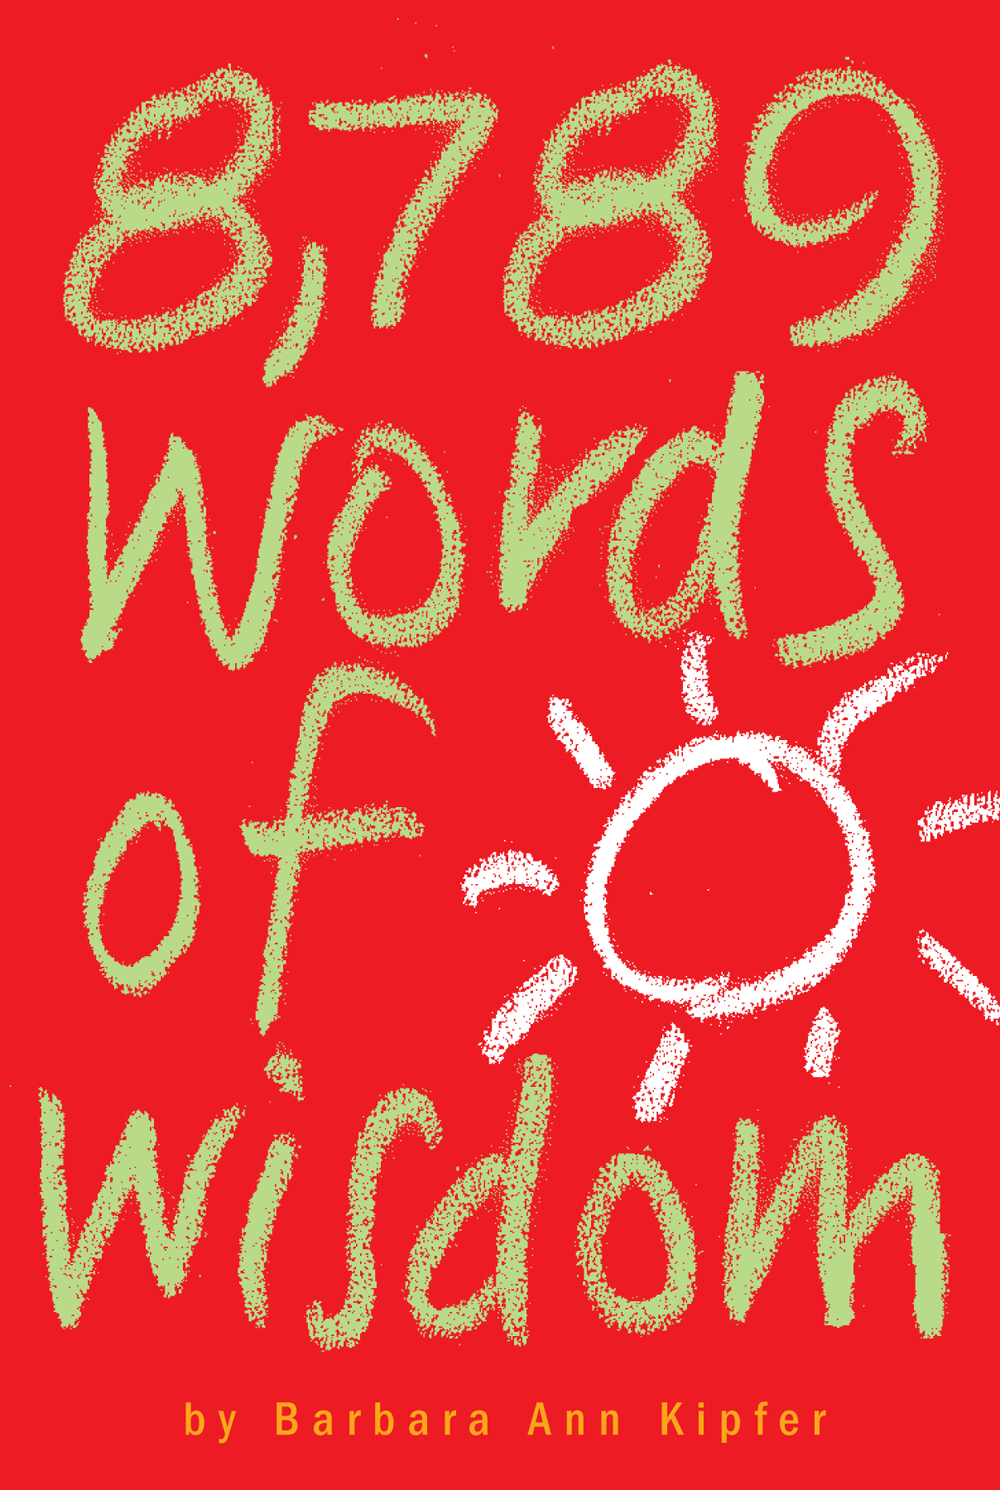 8,789 Words of Wisdom: Proverbs, Precepts, Maxims, Adages, and Axioms to Live By